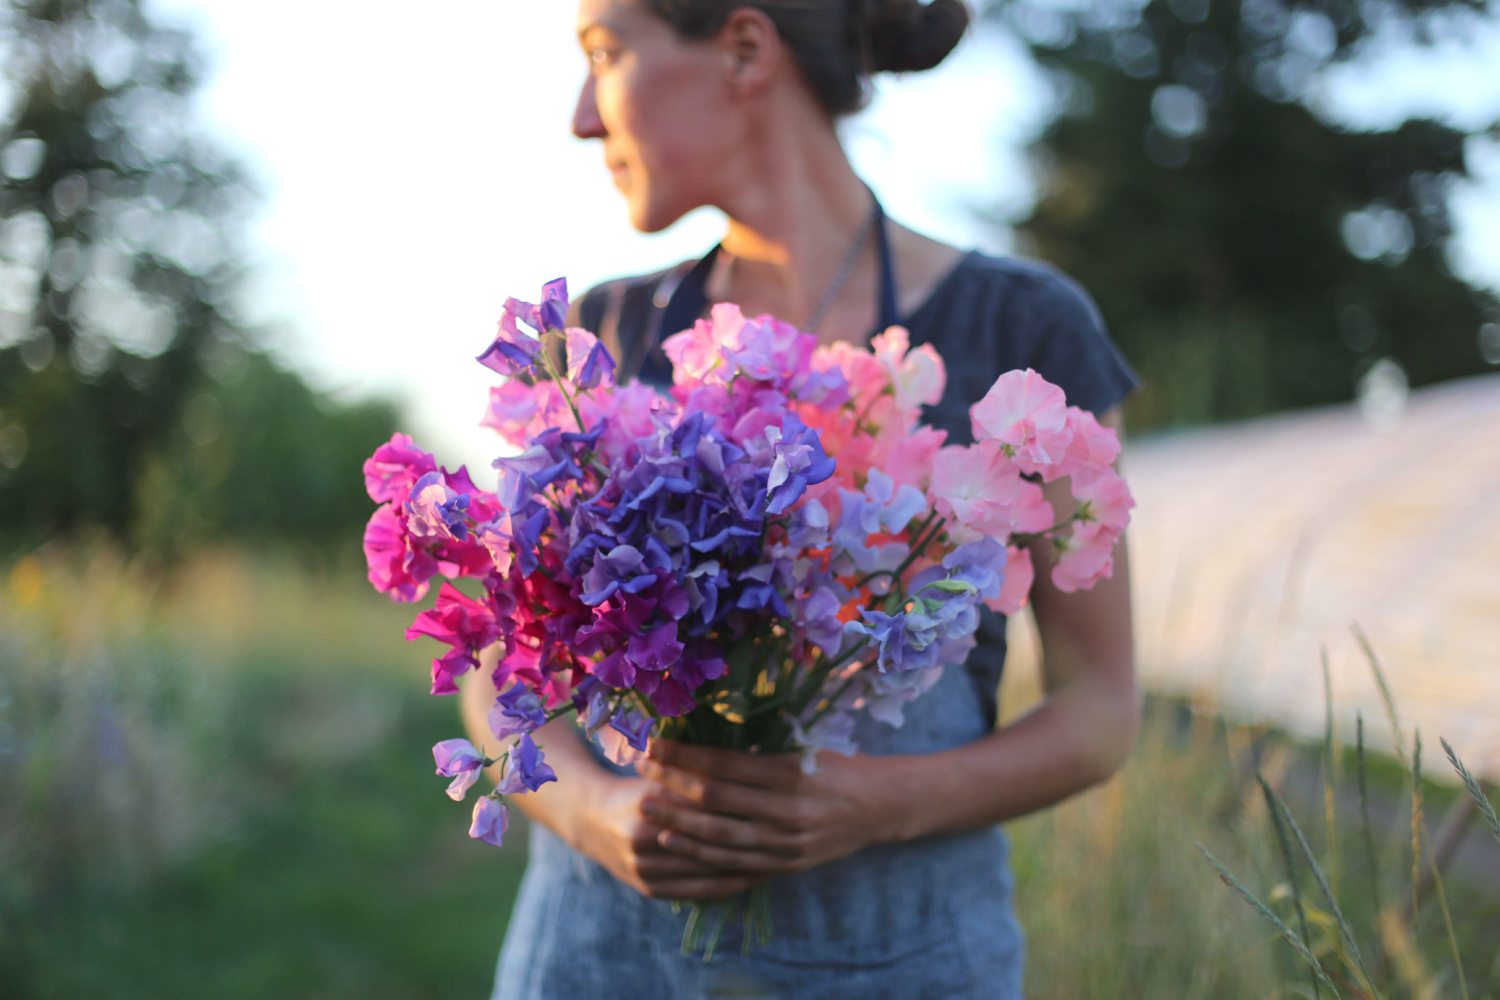 Erin Benzakein holding a bouquet of sweet peas